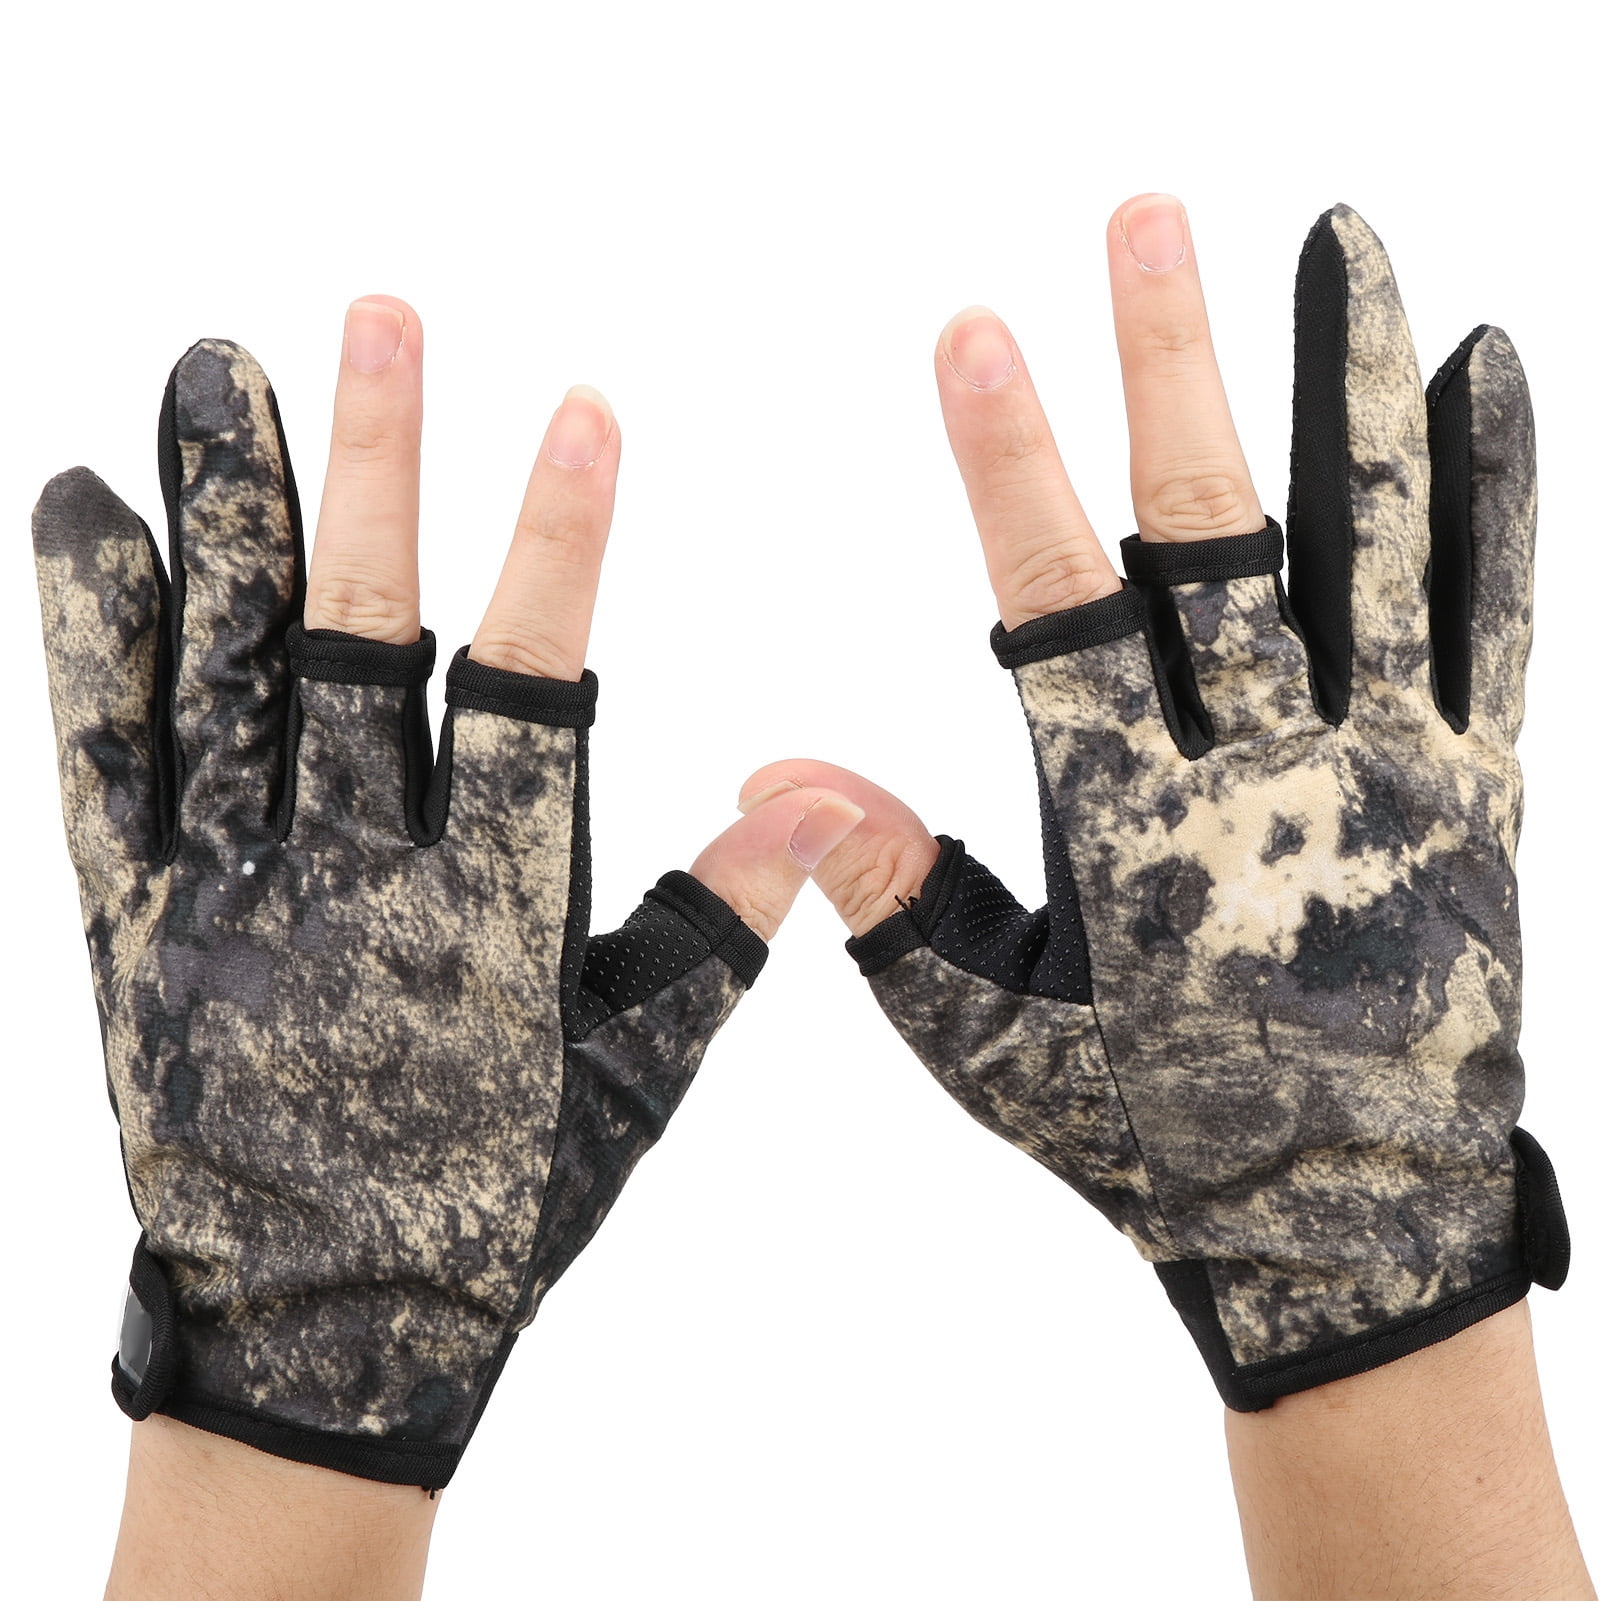 New Gloves Camo Warm Winter Hunting Bamboo Charcoal Rubber Grip Palm Soft Unisex